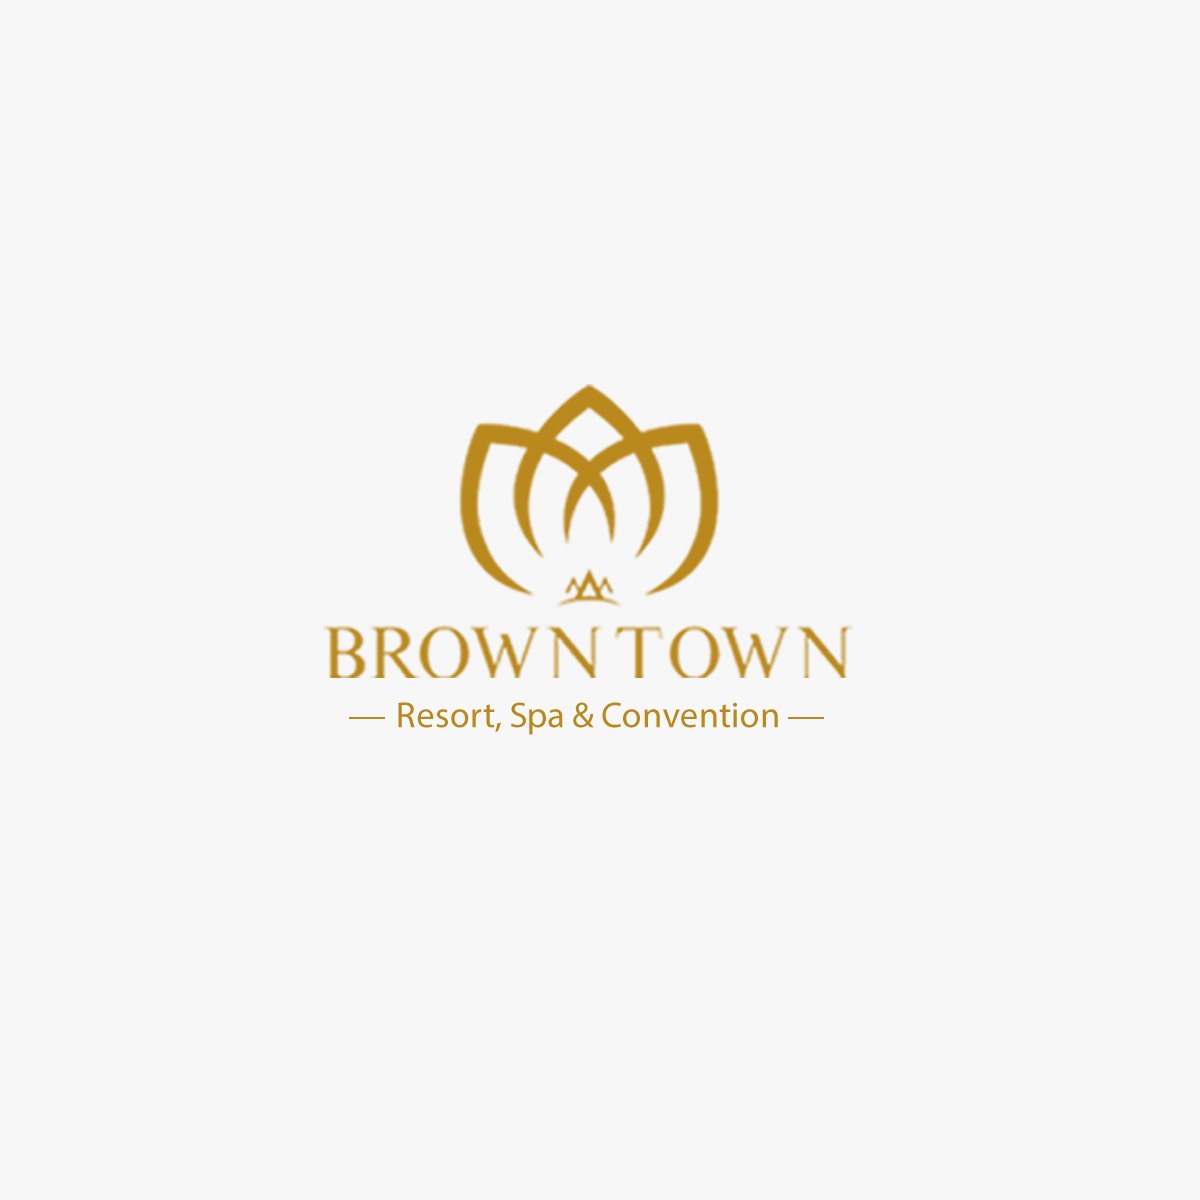 Brown Town Resort Spa & Convention